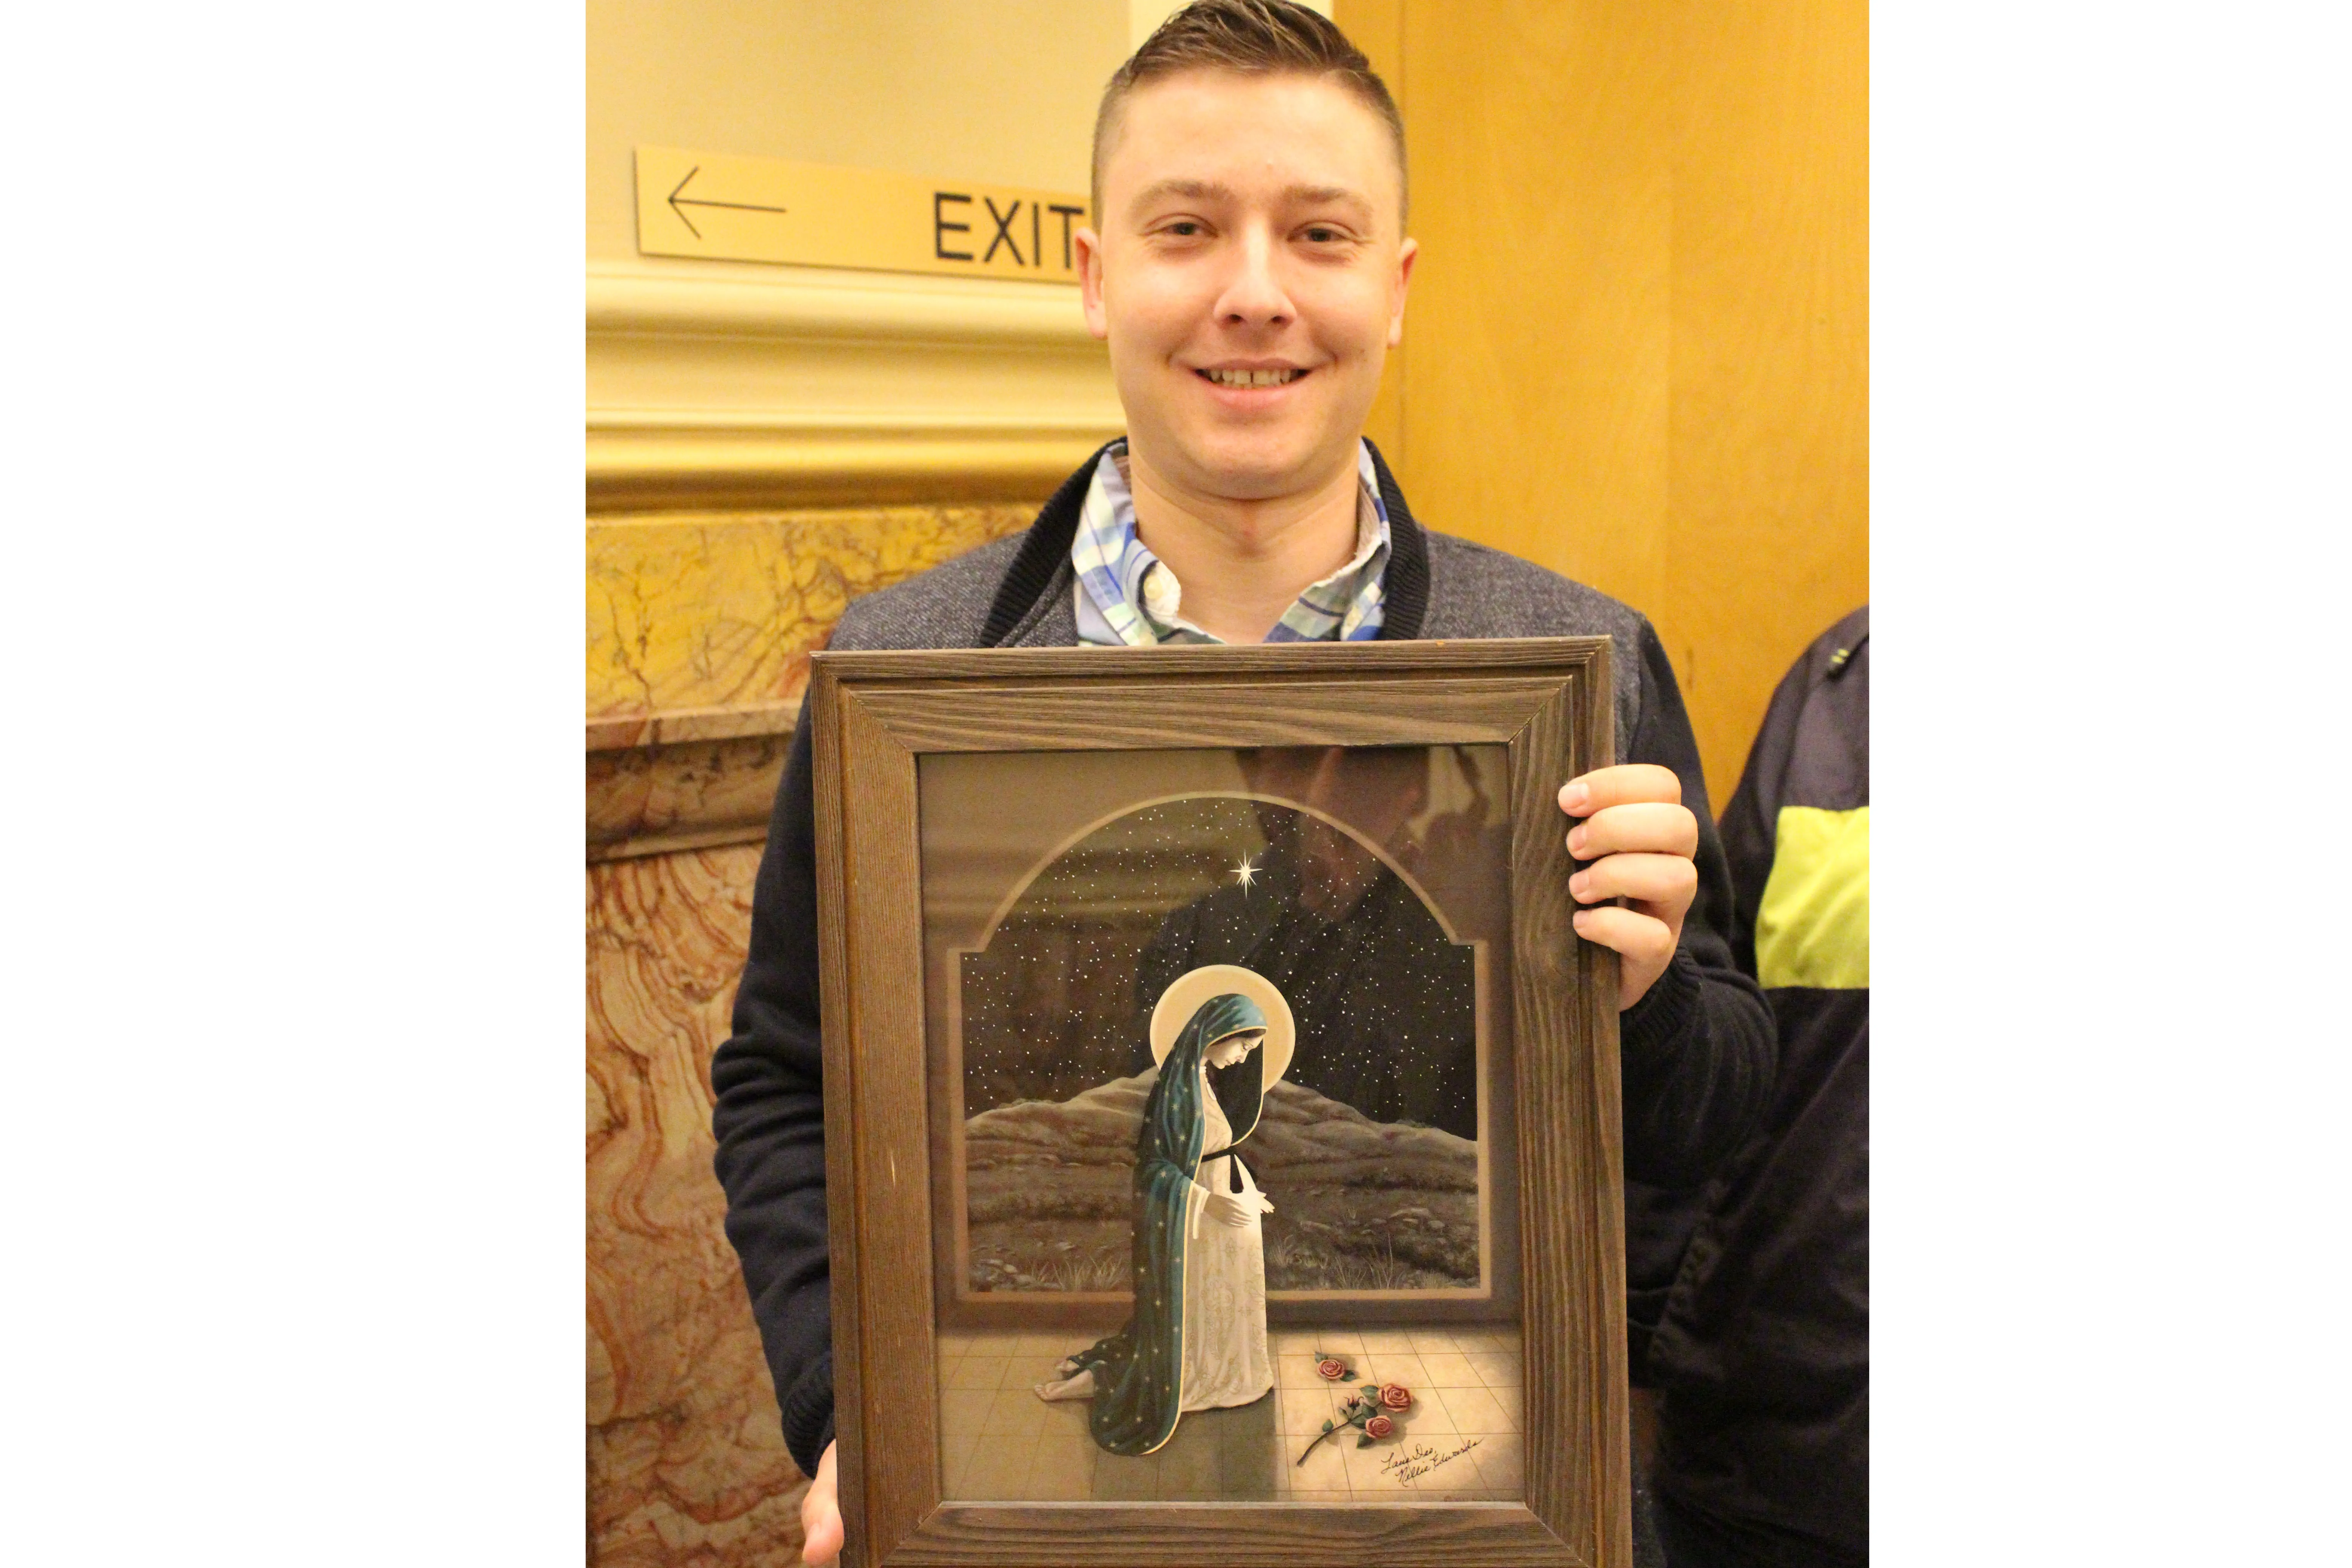 Luke Faulkner, a real estate agent from Denver, holds an icon of Our Lady of Guadalupe while waiting to enter a public hearing on an abortion bill at the Colorado state capitol on March 9, 2022. Jonah McKeown/CNA